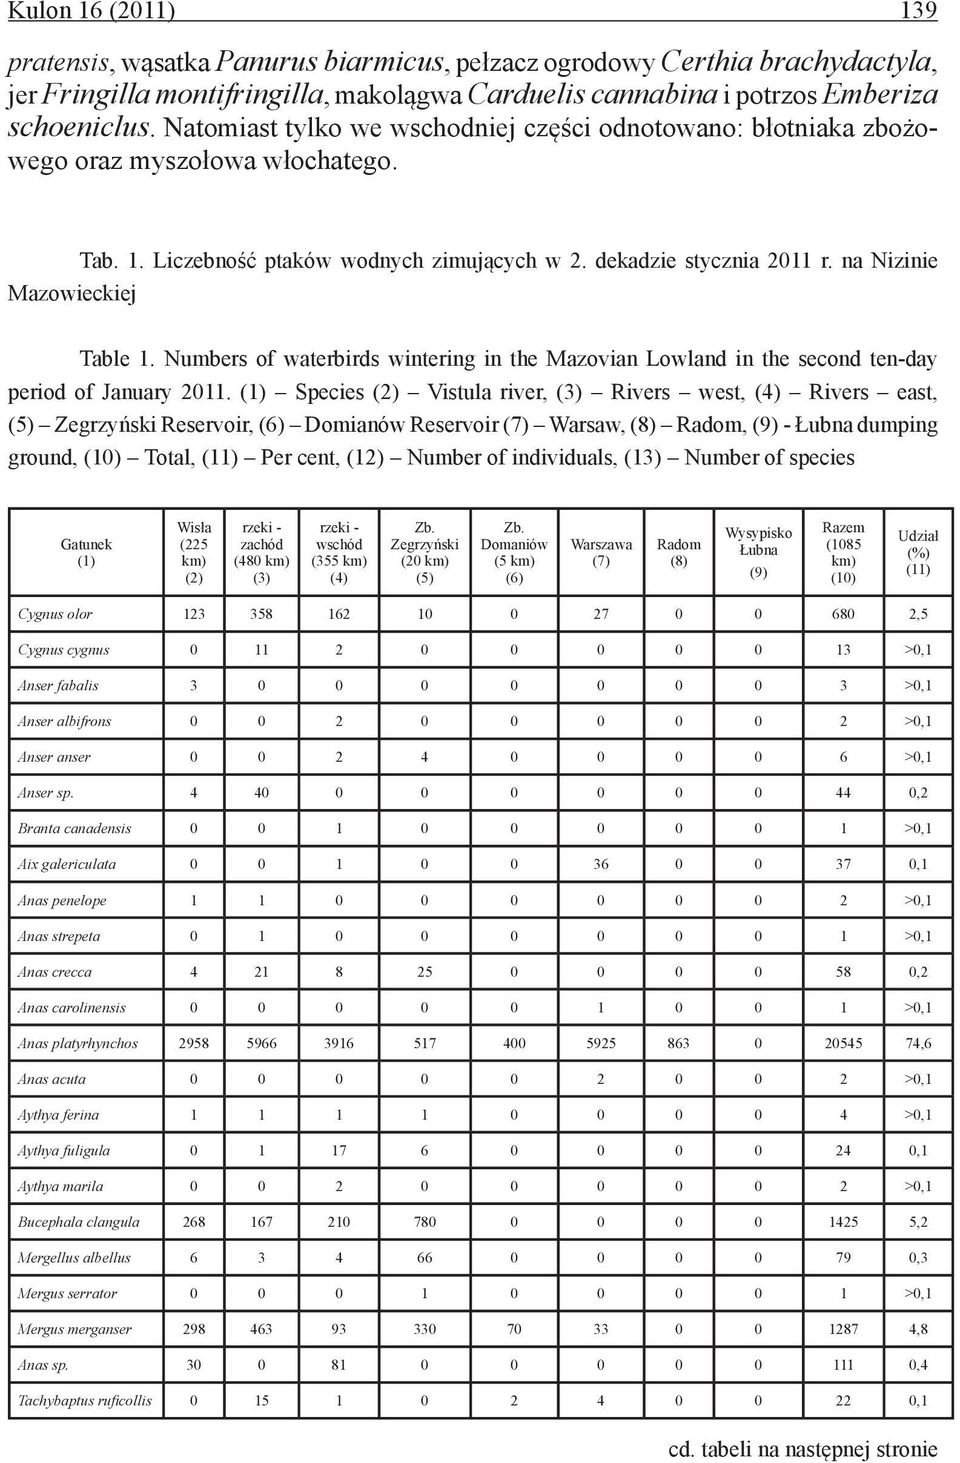 na Nizinie Mazowieckiej Table 1. Numbers of waterbirds wintering in the Mazovian Lowland in the second ten-day period of January 2011.